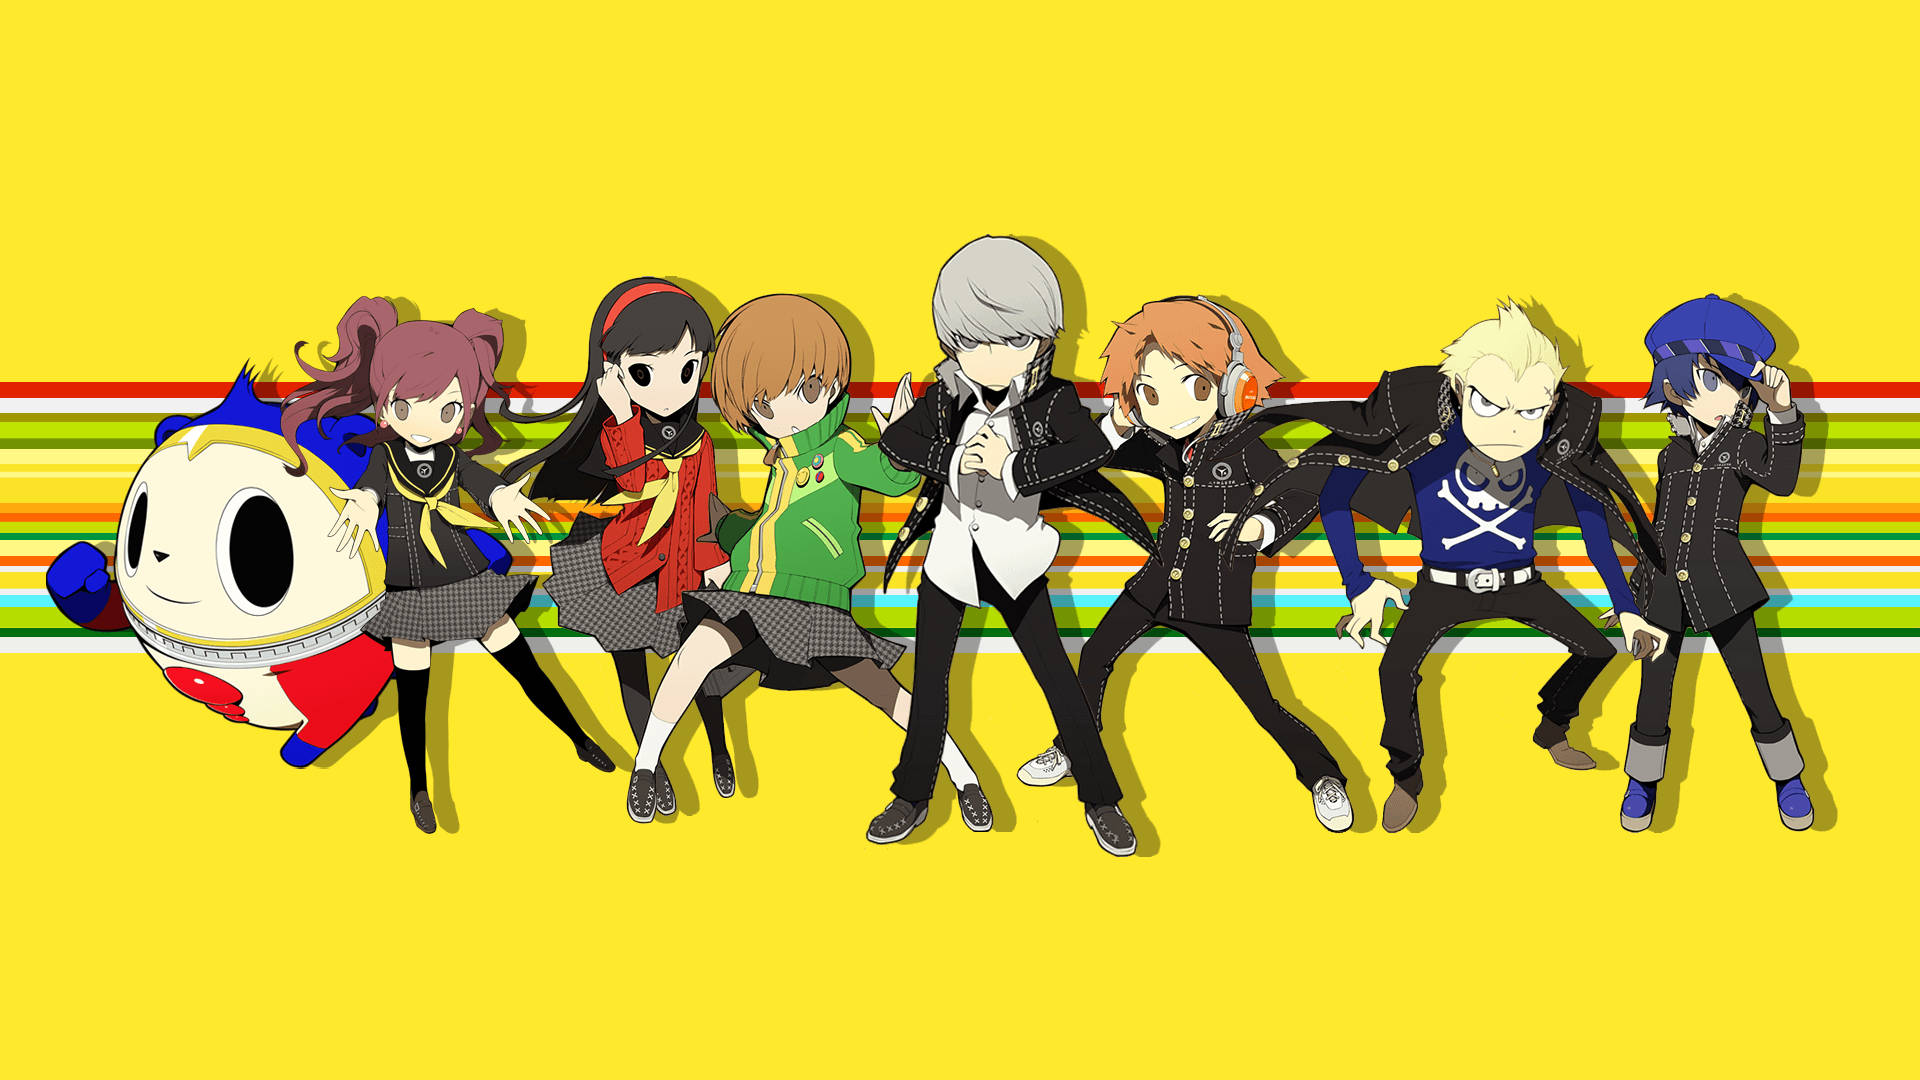 Persona 4 Cute Characters Line Up Background